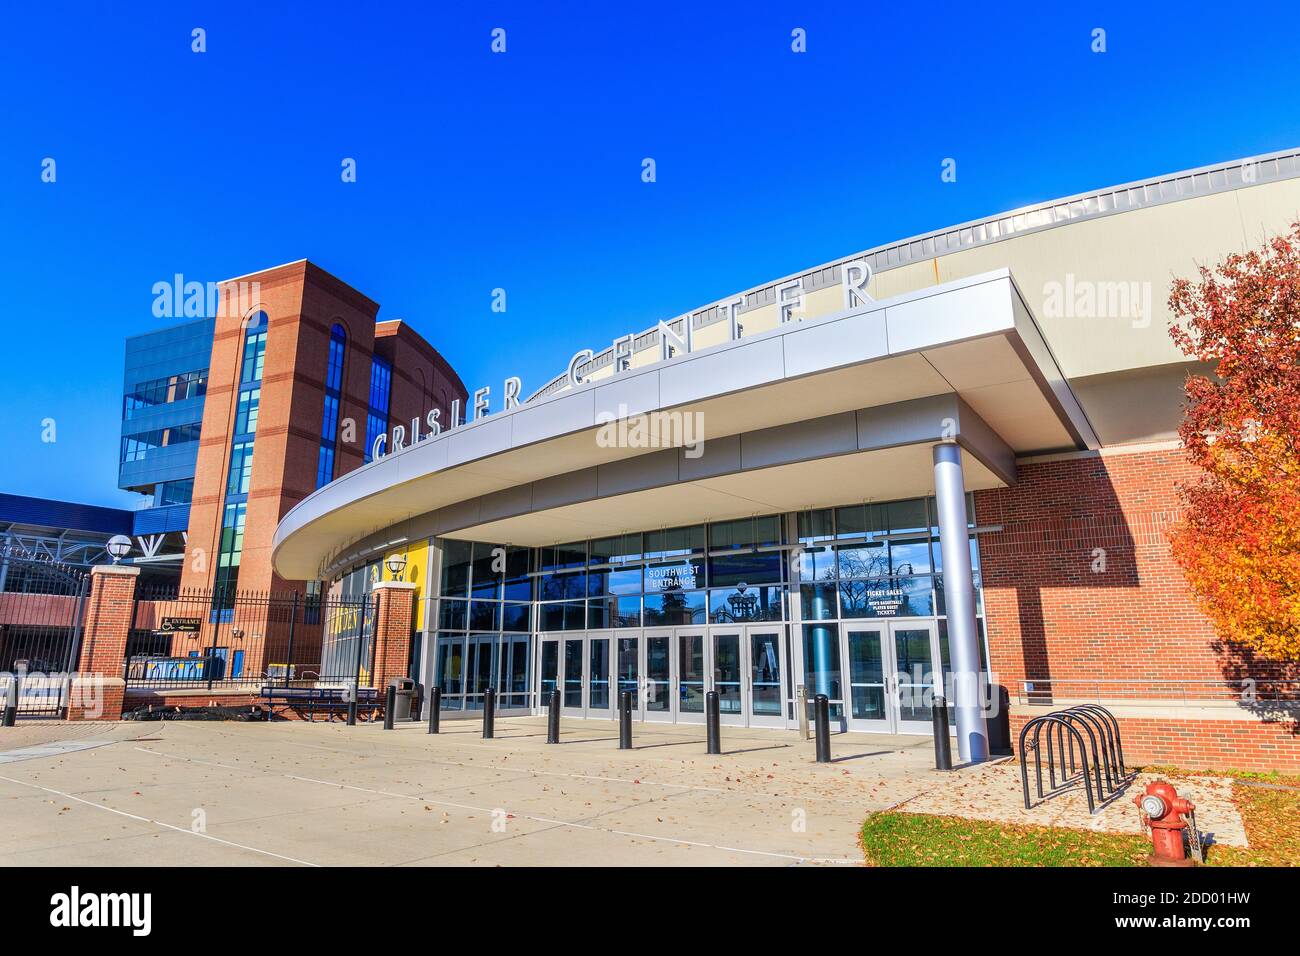 ANN ARBOR, MI, USA - NOVEMBER 8:  The Crisler Center ('The House that Cazzie Built') on November 8, 2020 at the University of Michigan in Ann Arbor, M Stock Photo